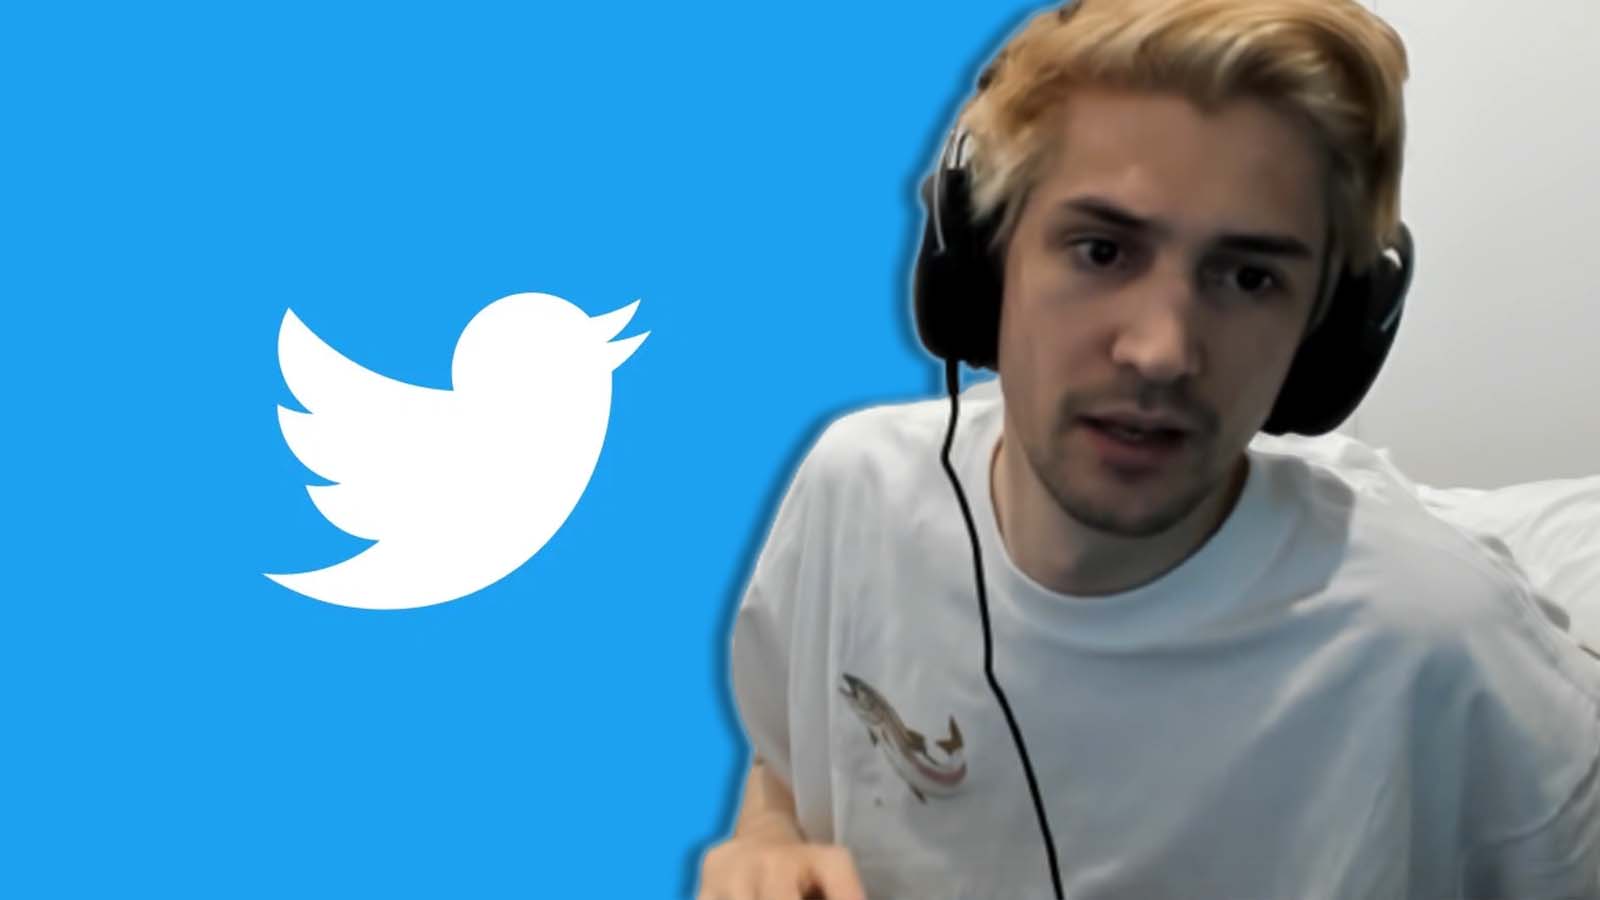 xqc-twitter-users-hate-streamers-more-harm